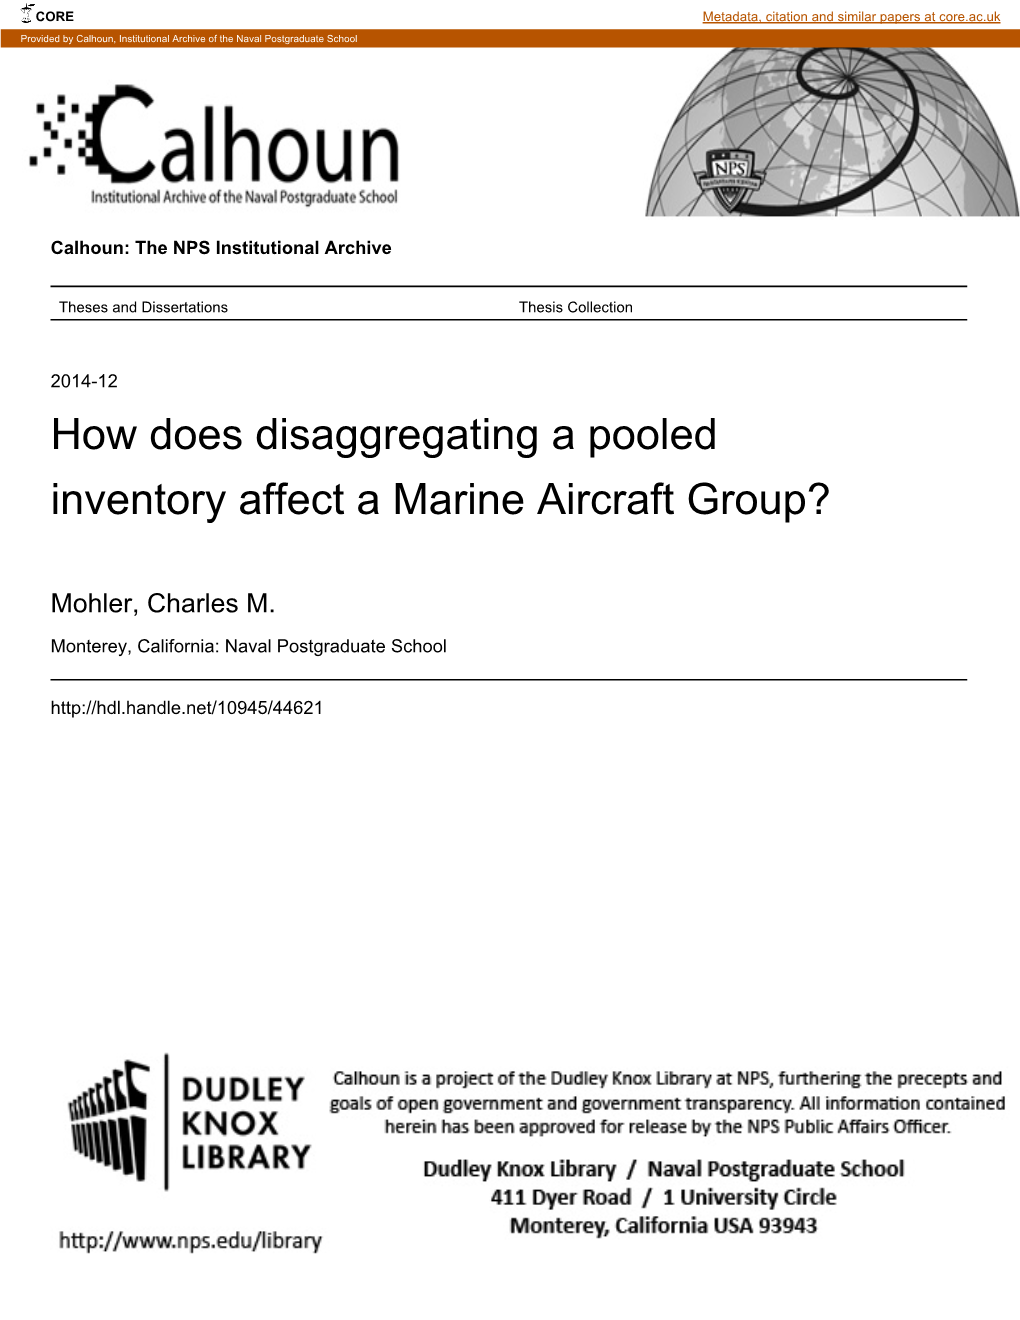 How Does Disaggregating a Pooled Inventory Affect a Marine Aircraft Group?